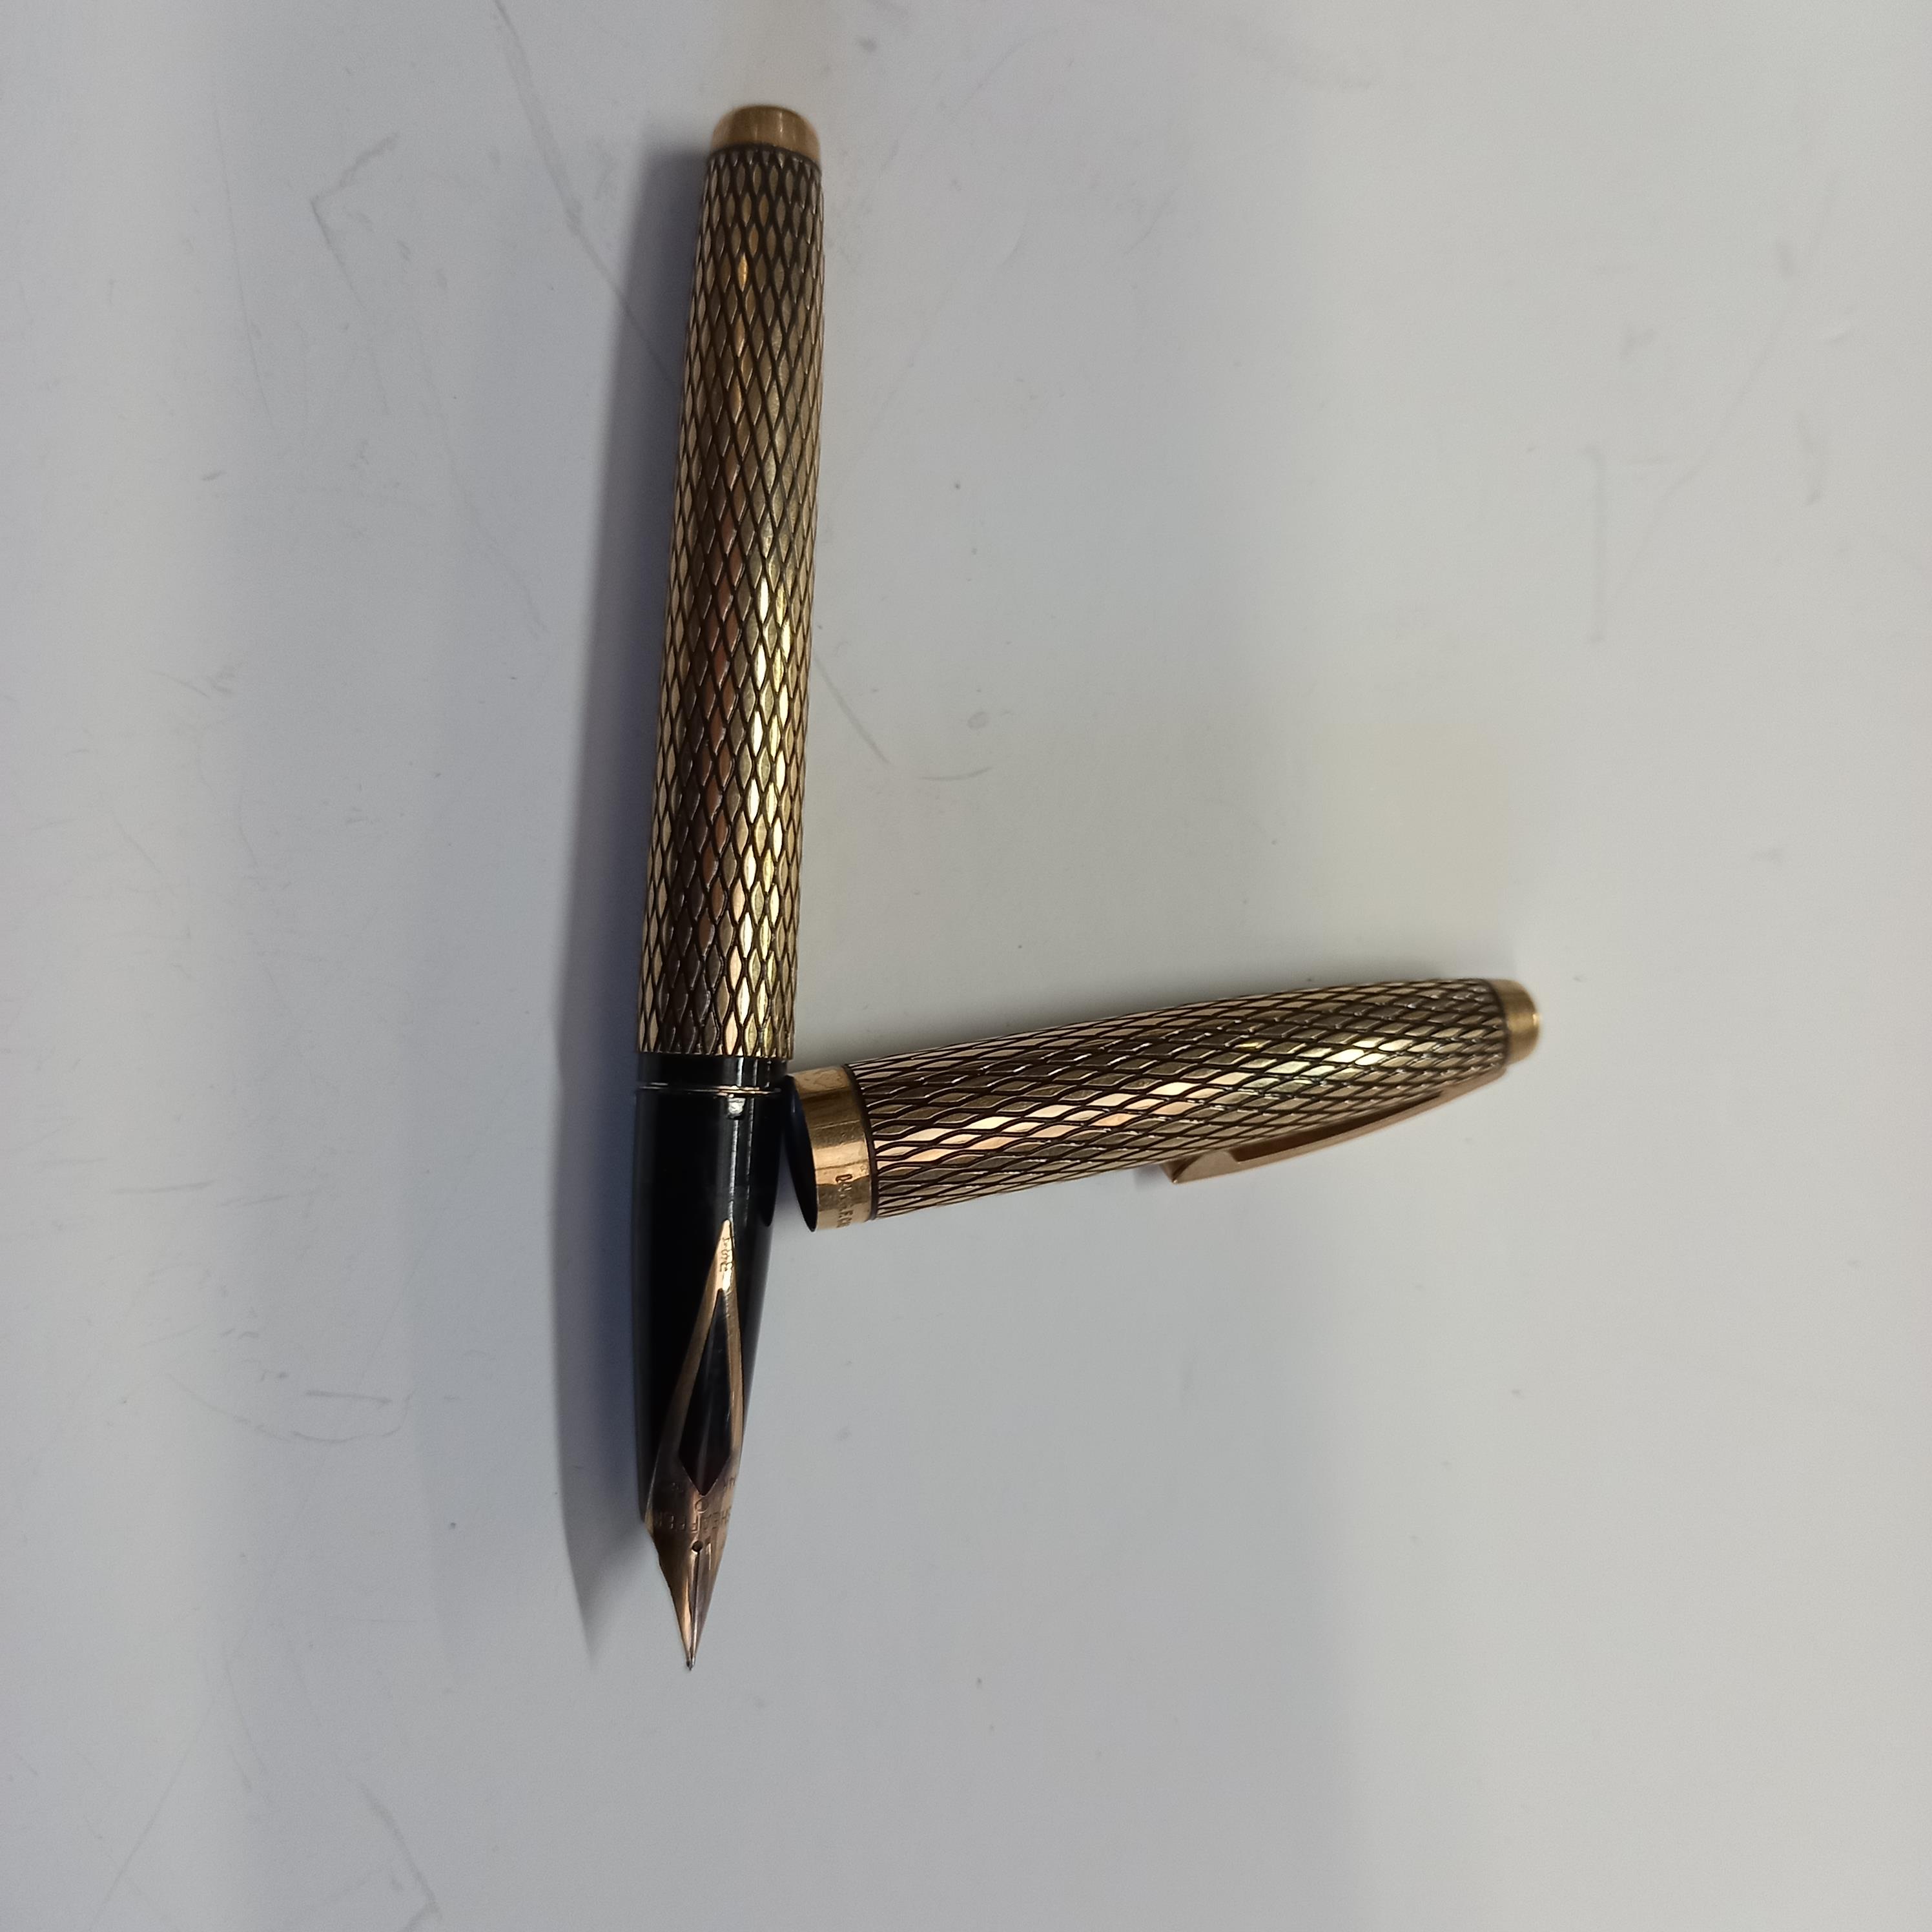 22ct Gold Case Sheaffer Fountain pen in box - Image 2 of 2